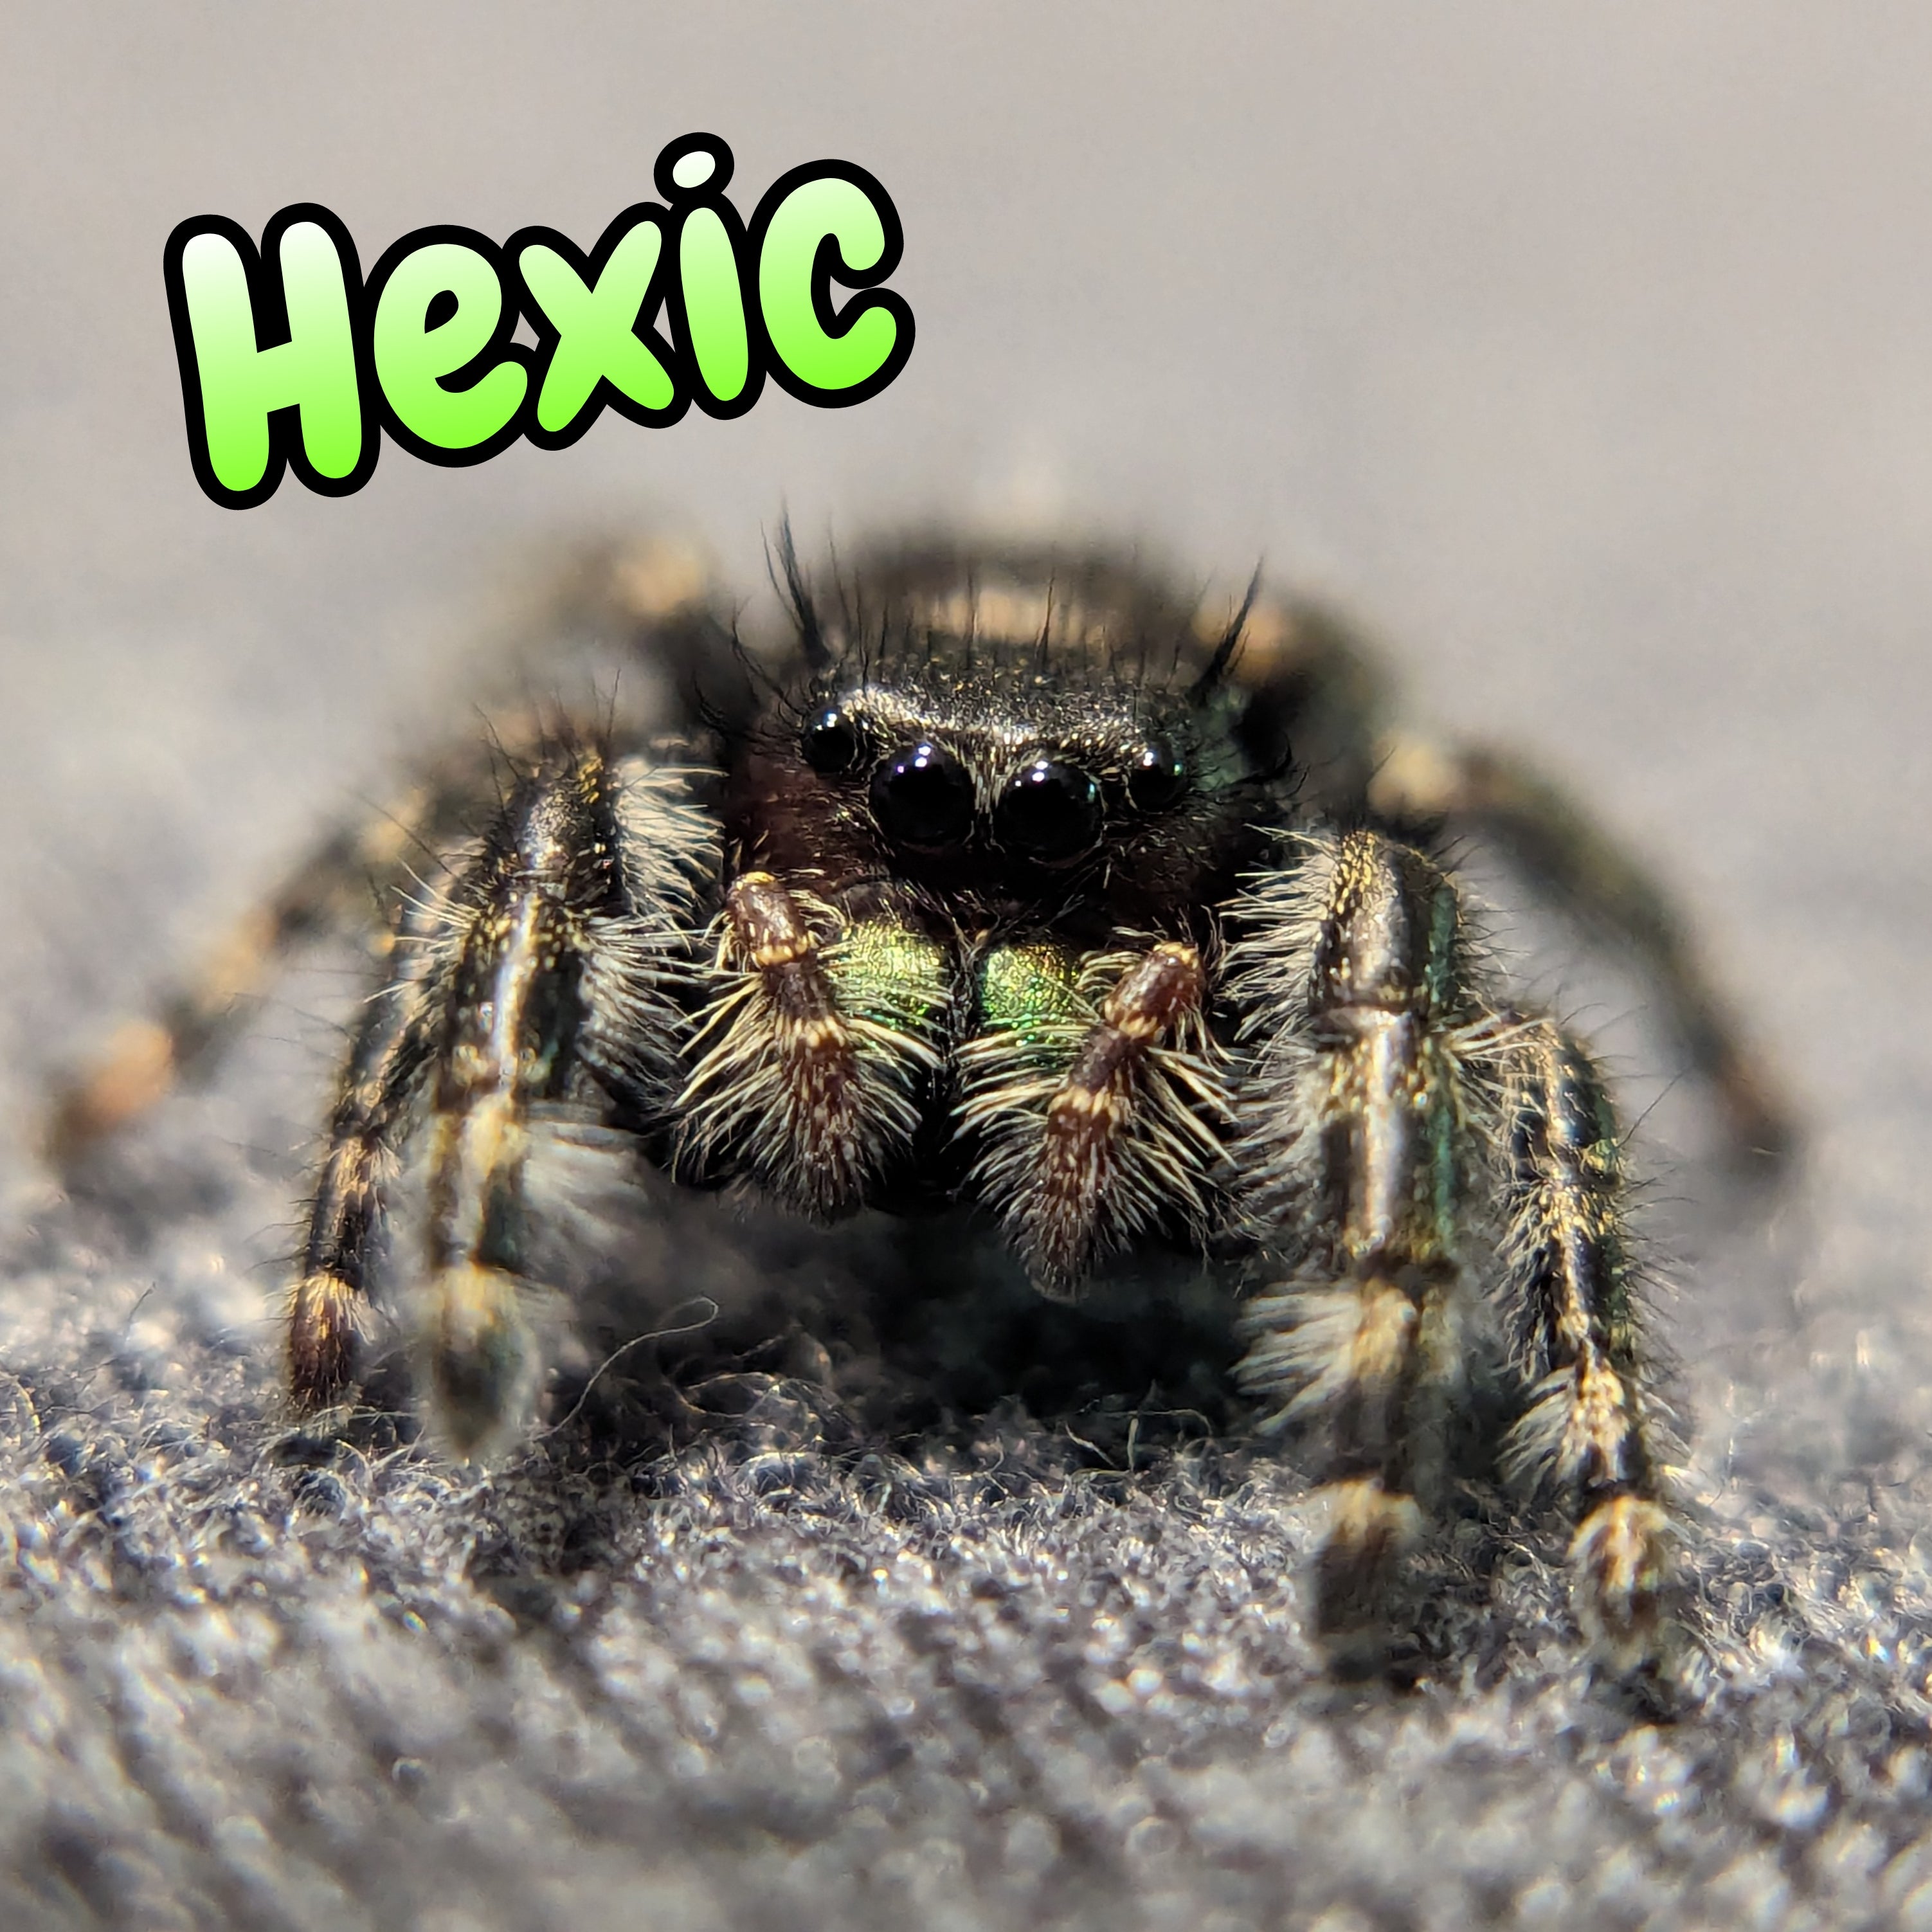 Audax Jumping Spider "Hexic"